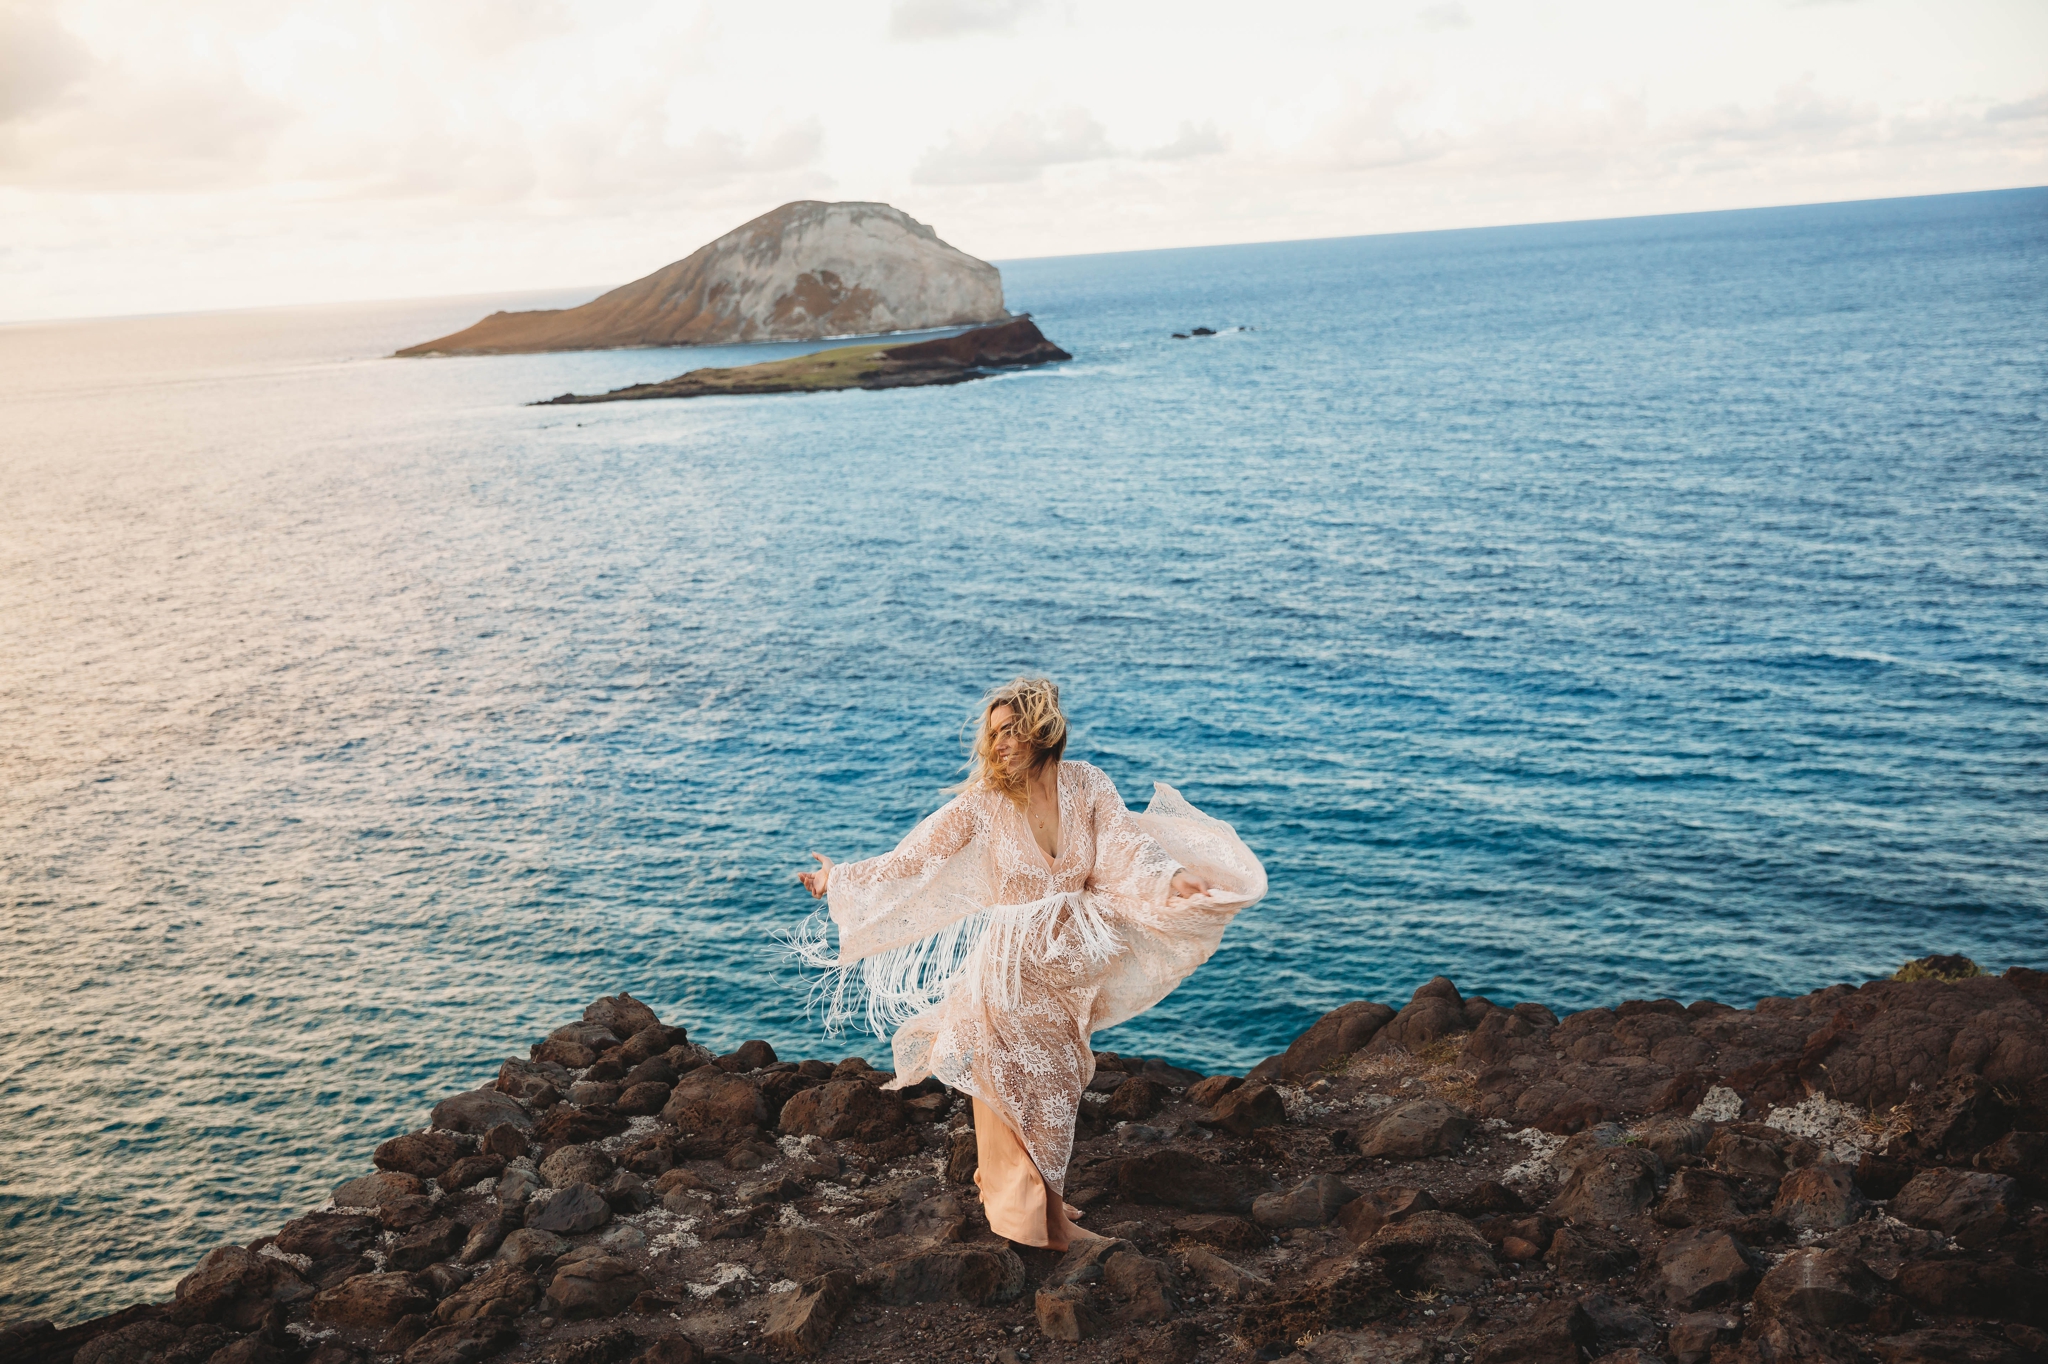  bride on the cliffs above Makapuu Beach at the Lookout, Waimanalo, HI looking over the ocean with the  Kāohikaipu Island in the background  - Oahu Hawaii Engagement Photographer - Bride in a flowy fringe boho wedding dress - lanikai lookout - deutsc